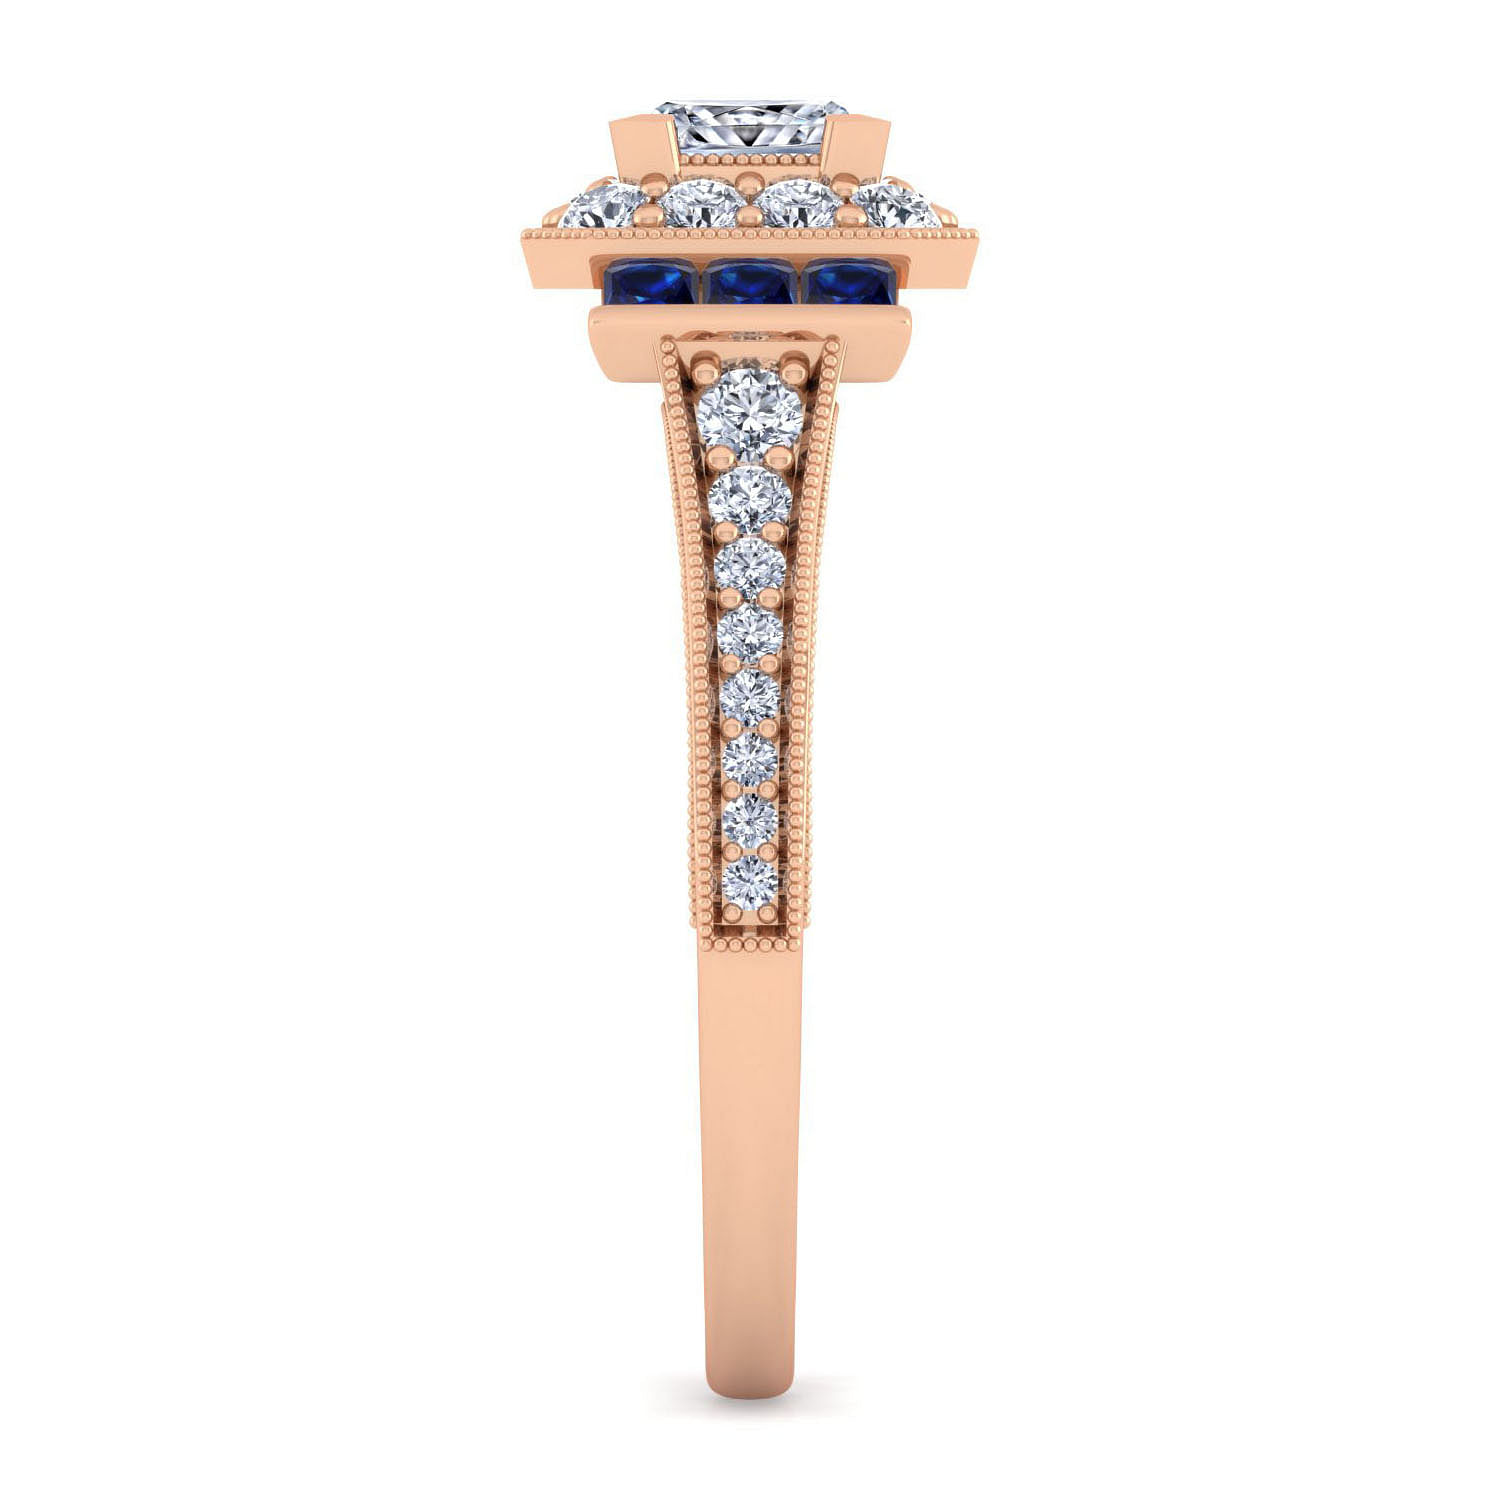 Vintage Inspired 14K Rose Gold Princess Halo Diamond and Sapphire Engagement Ring